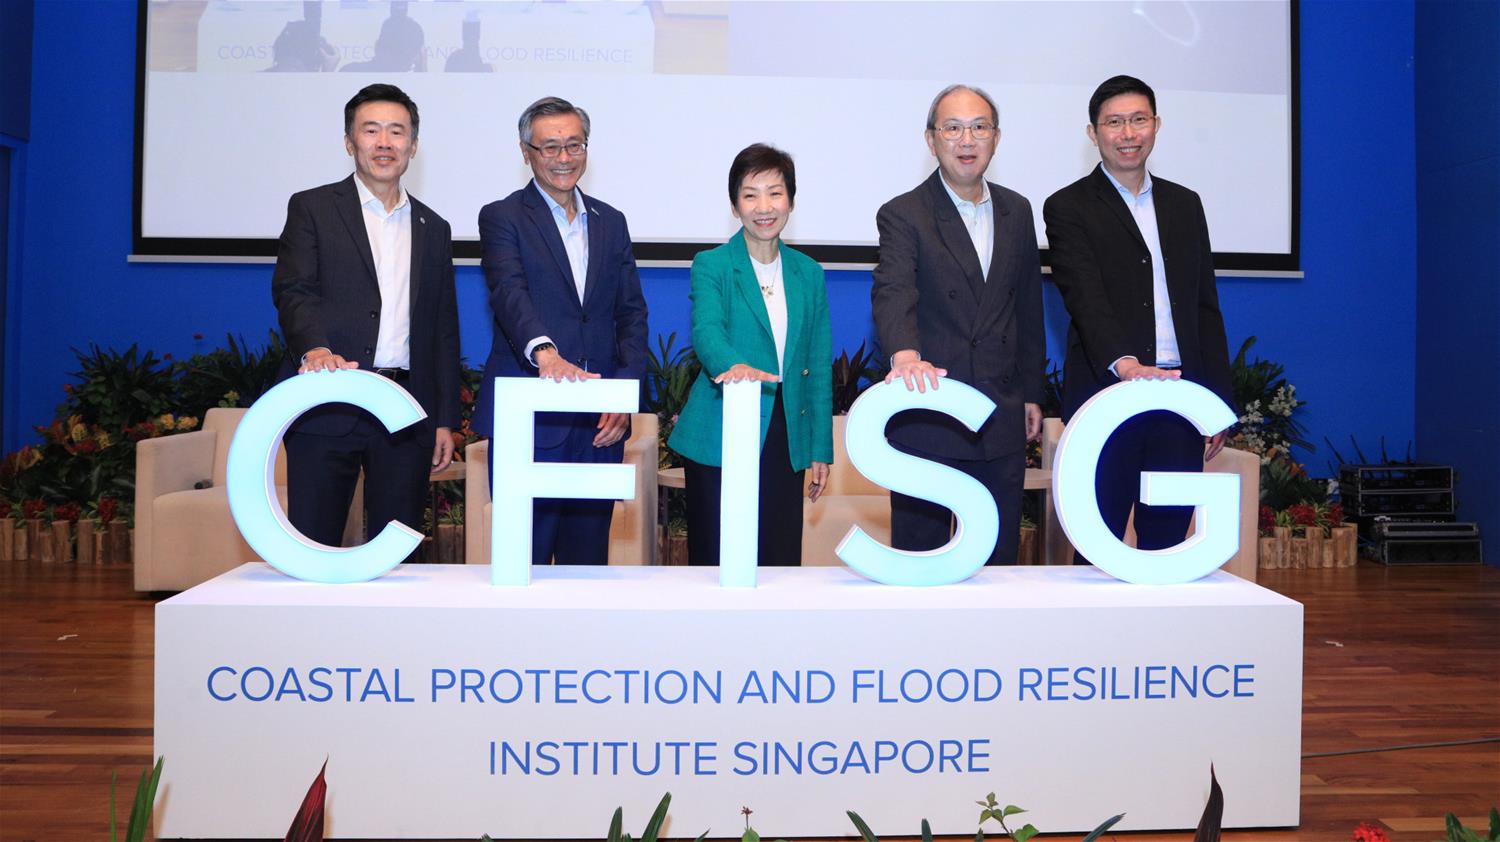 Coastal Protection and Flood Resilience Institute